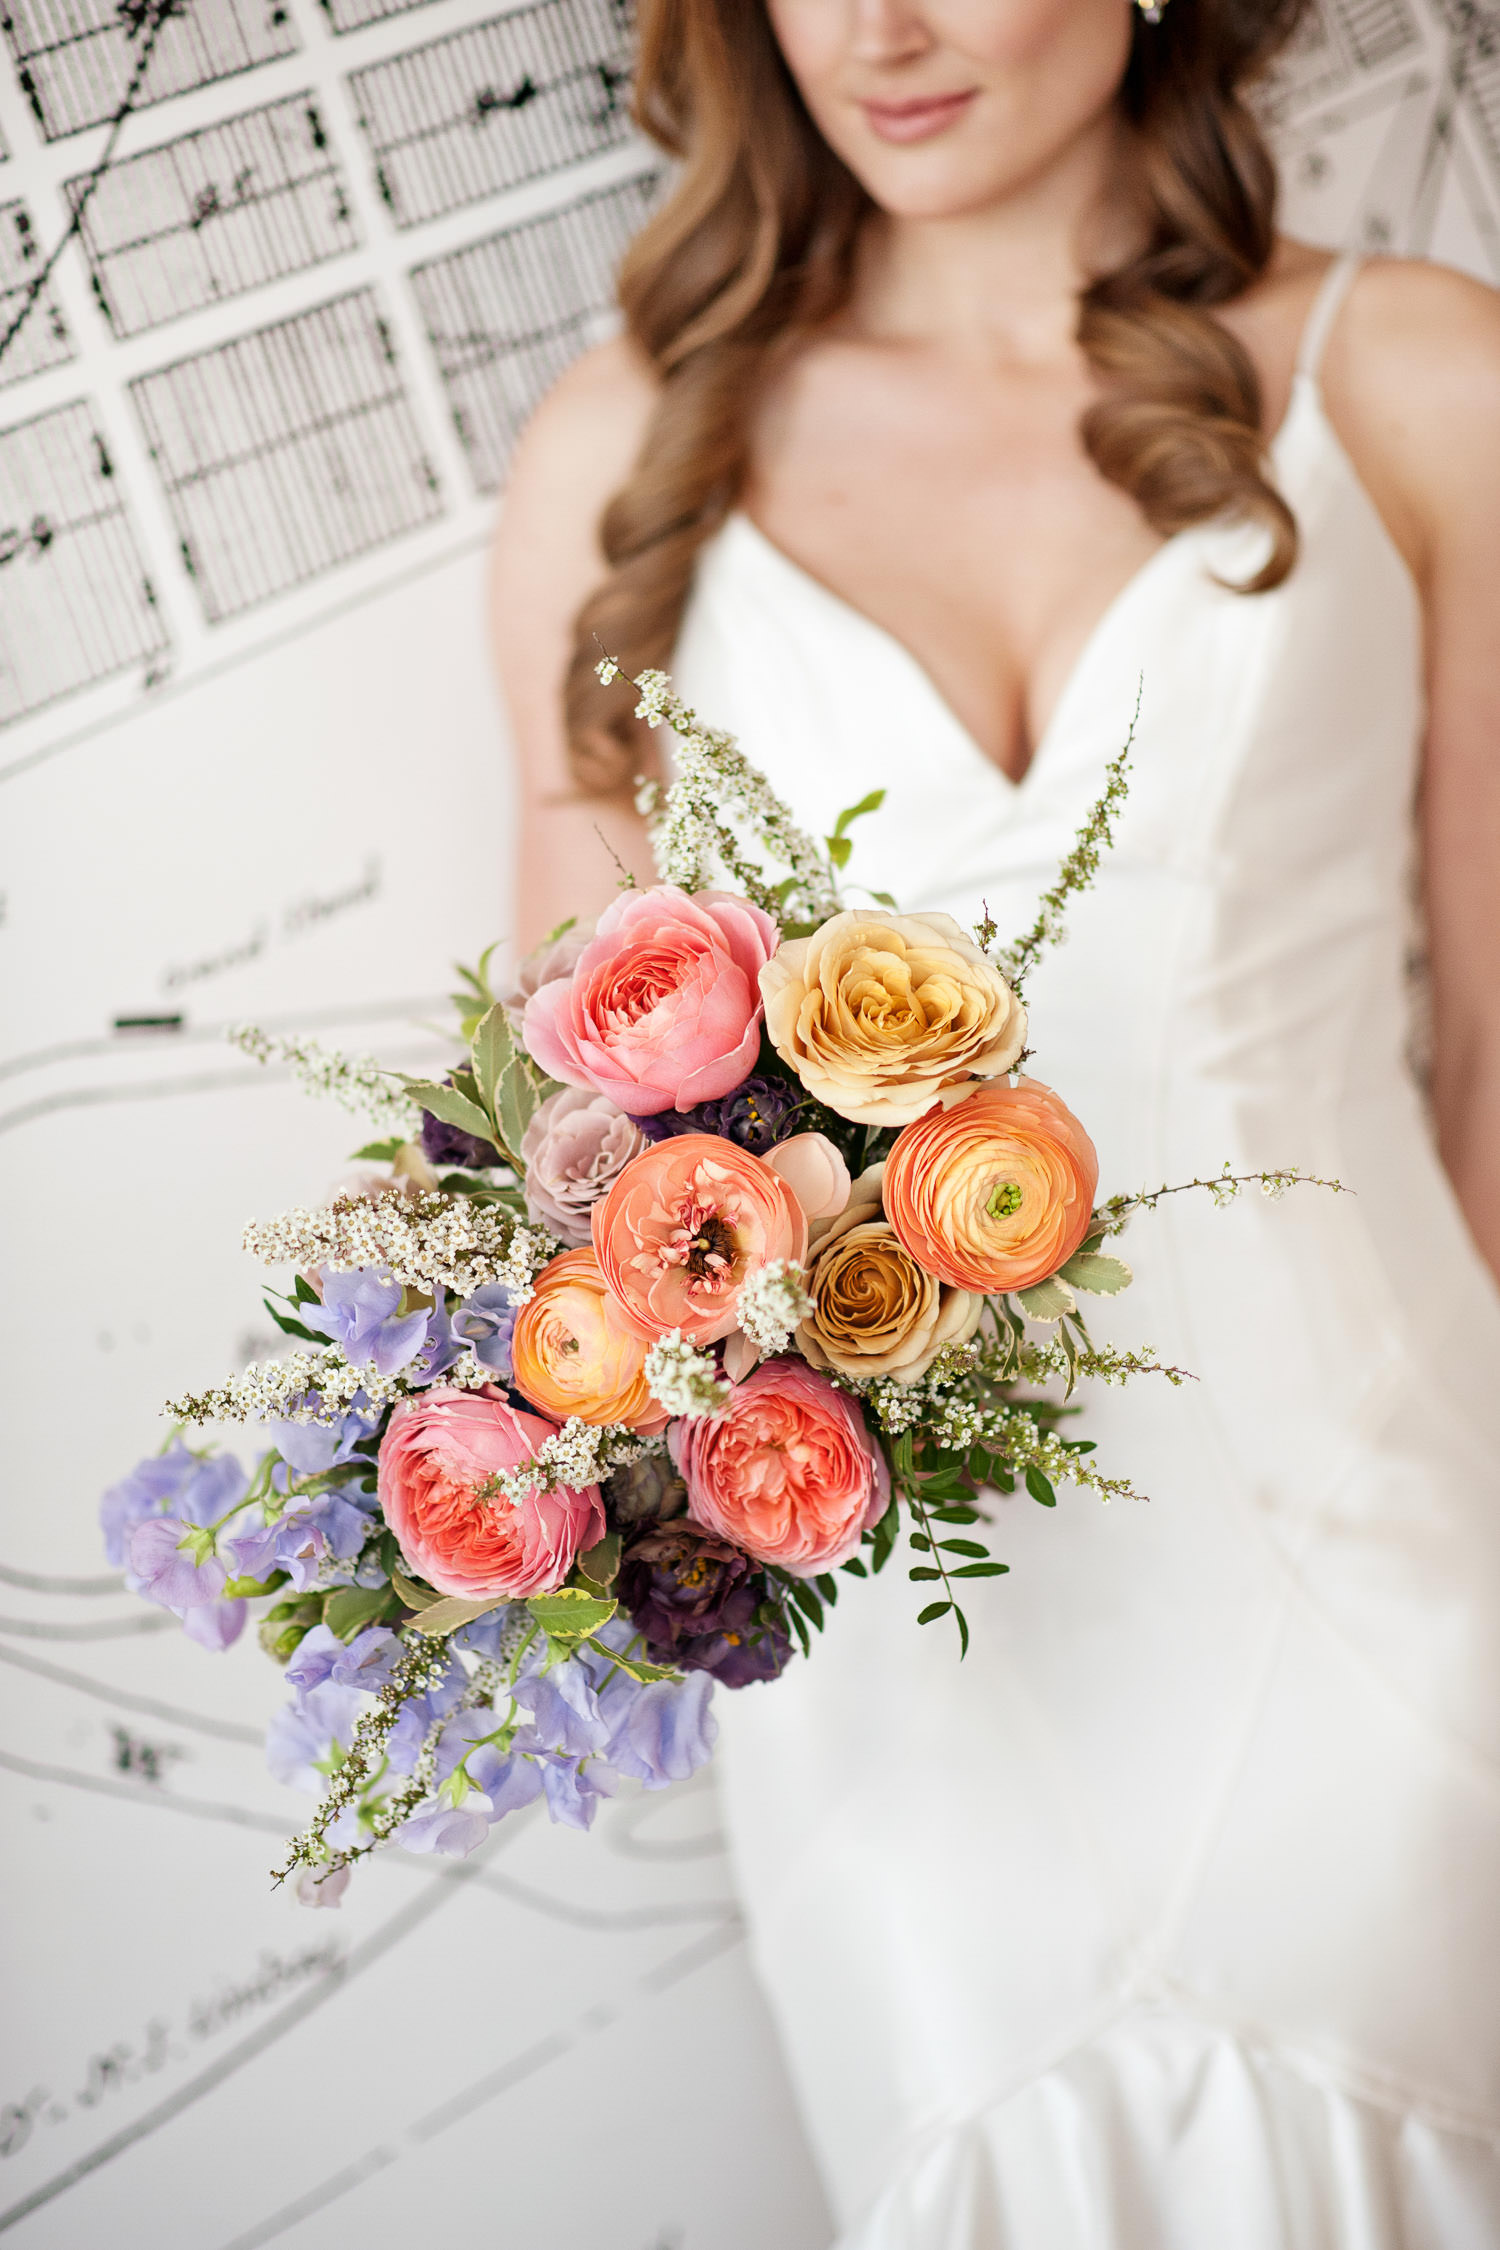 bridal bouquet spring wedding trends in 2020 captured by Tara Whittaker Photography